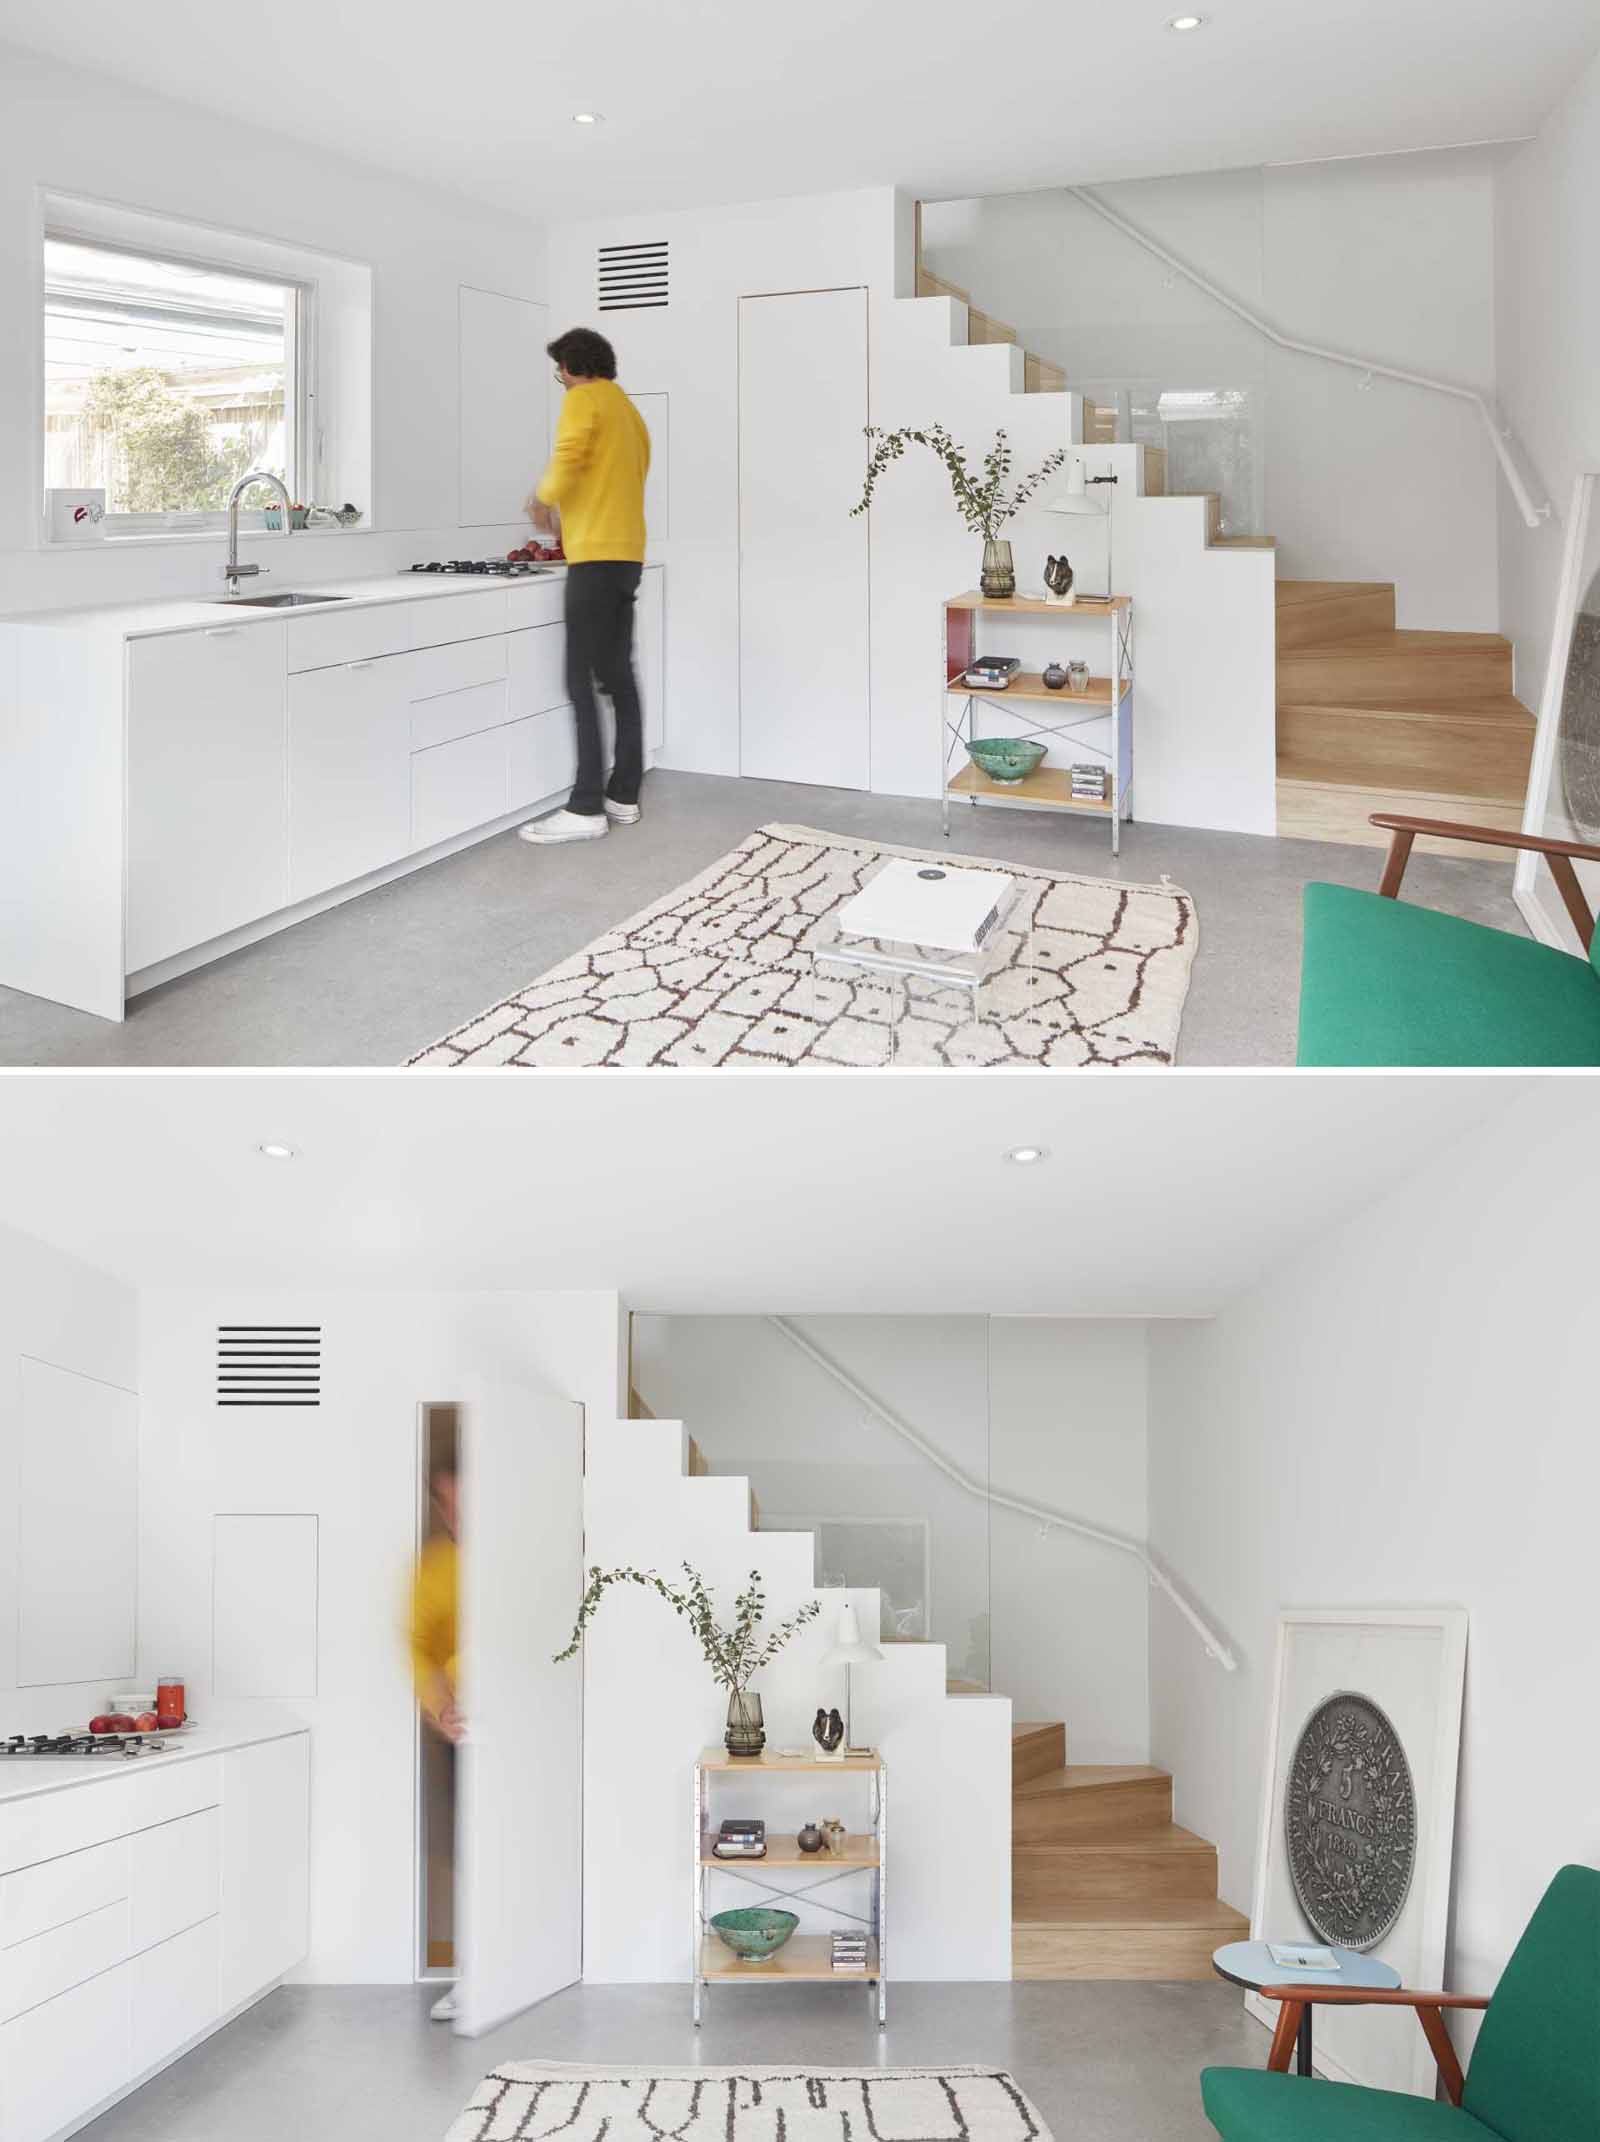 In this small laneway house and adjacent to the kitchen, is a bathroom door that almost blends into the wall. 